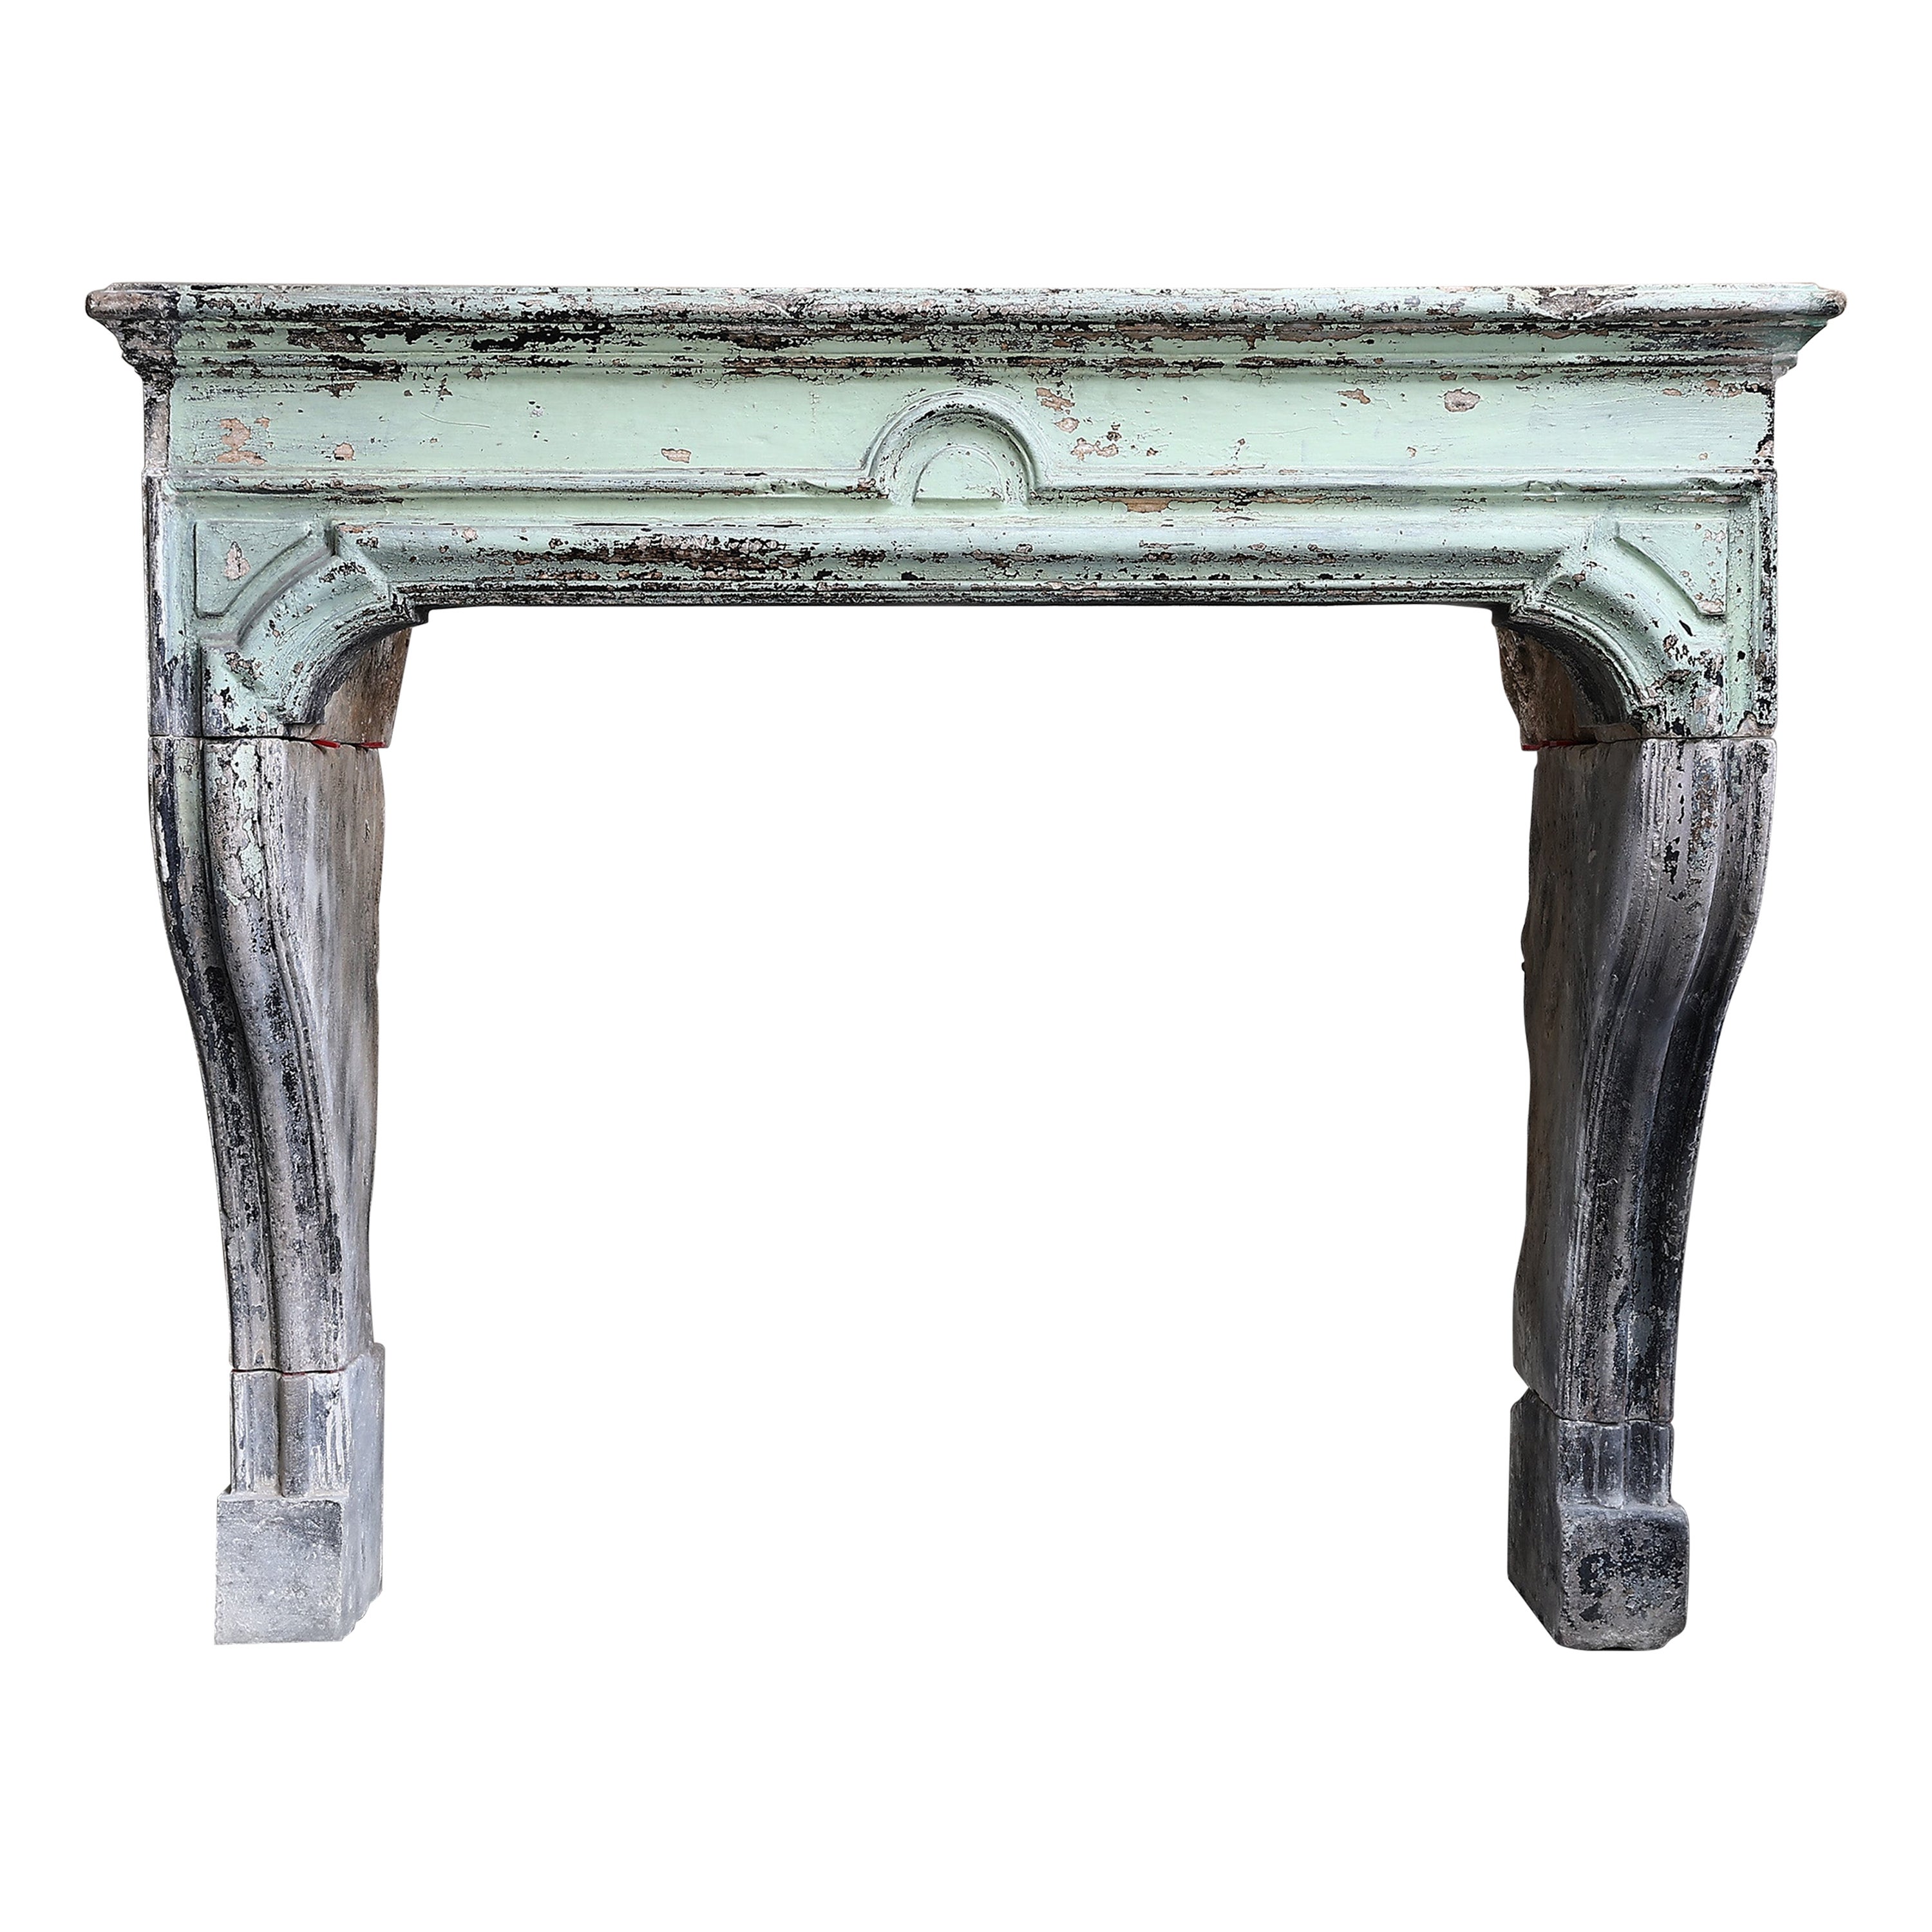 Antique Fireplace  18th Century  France  Style Louis XIV For Sale